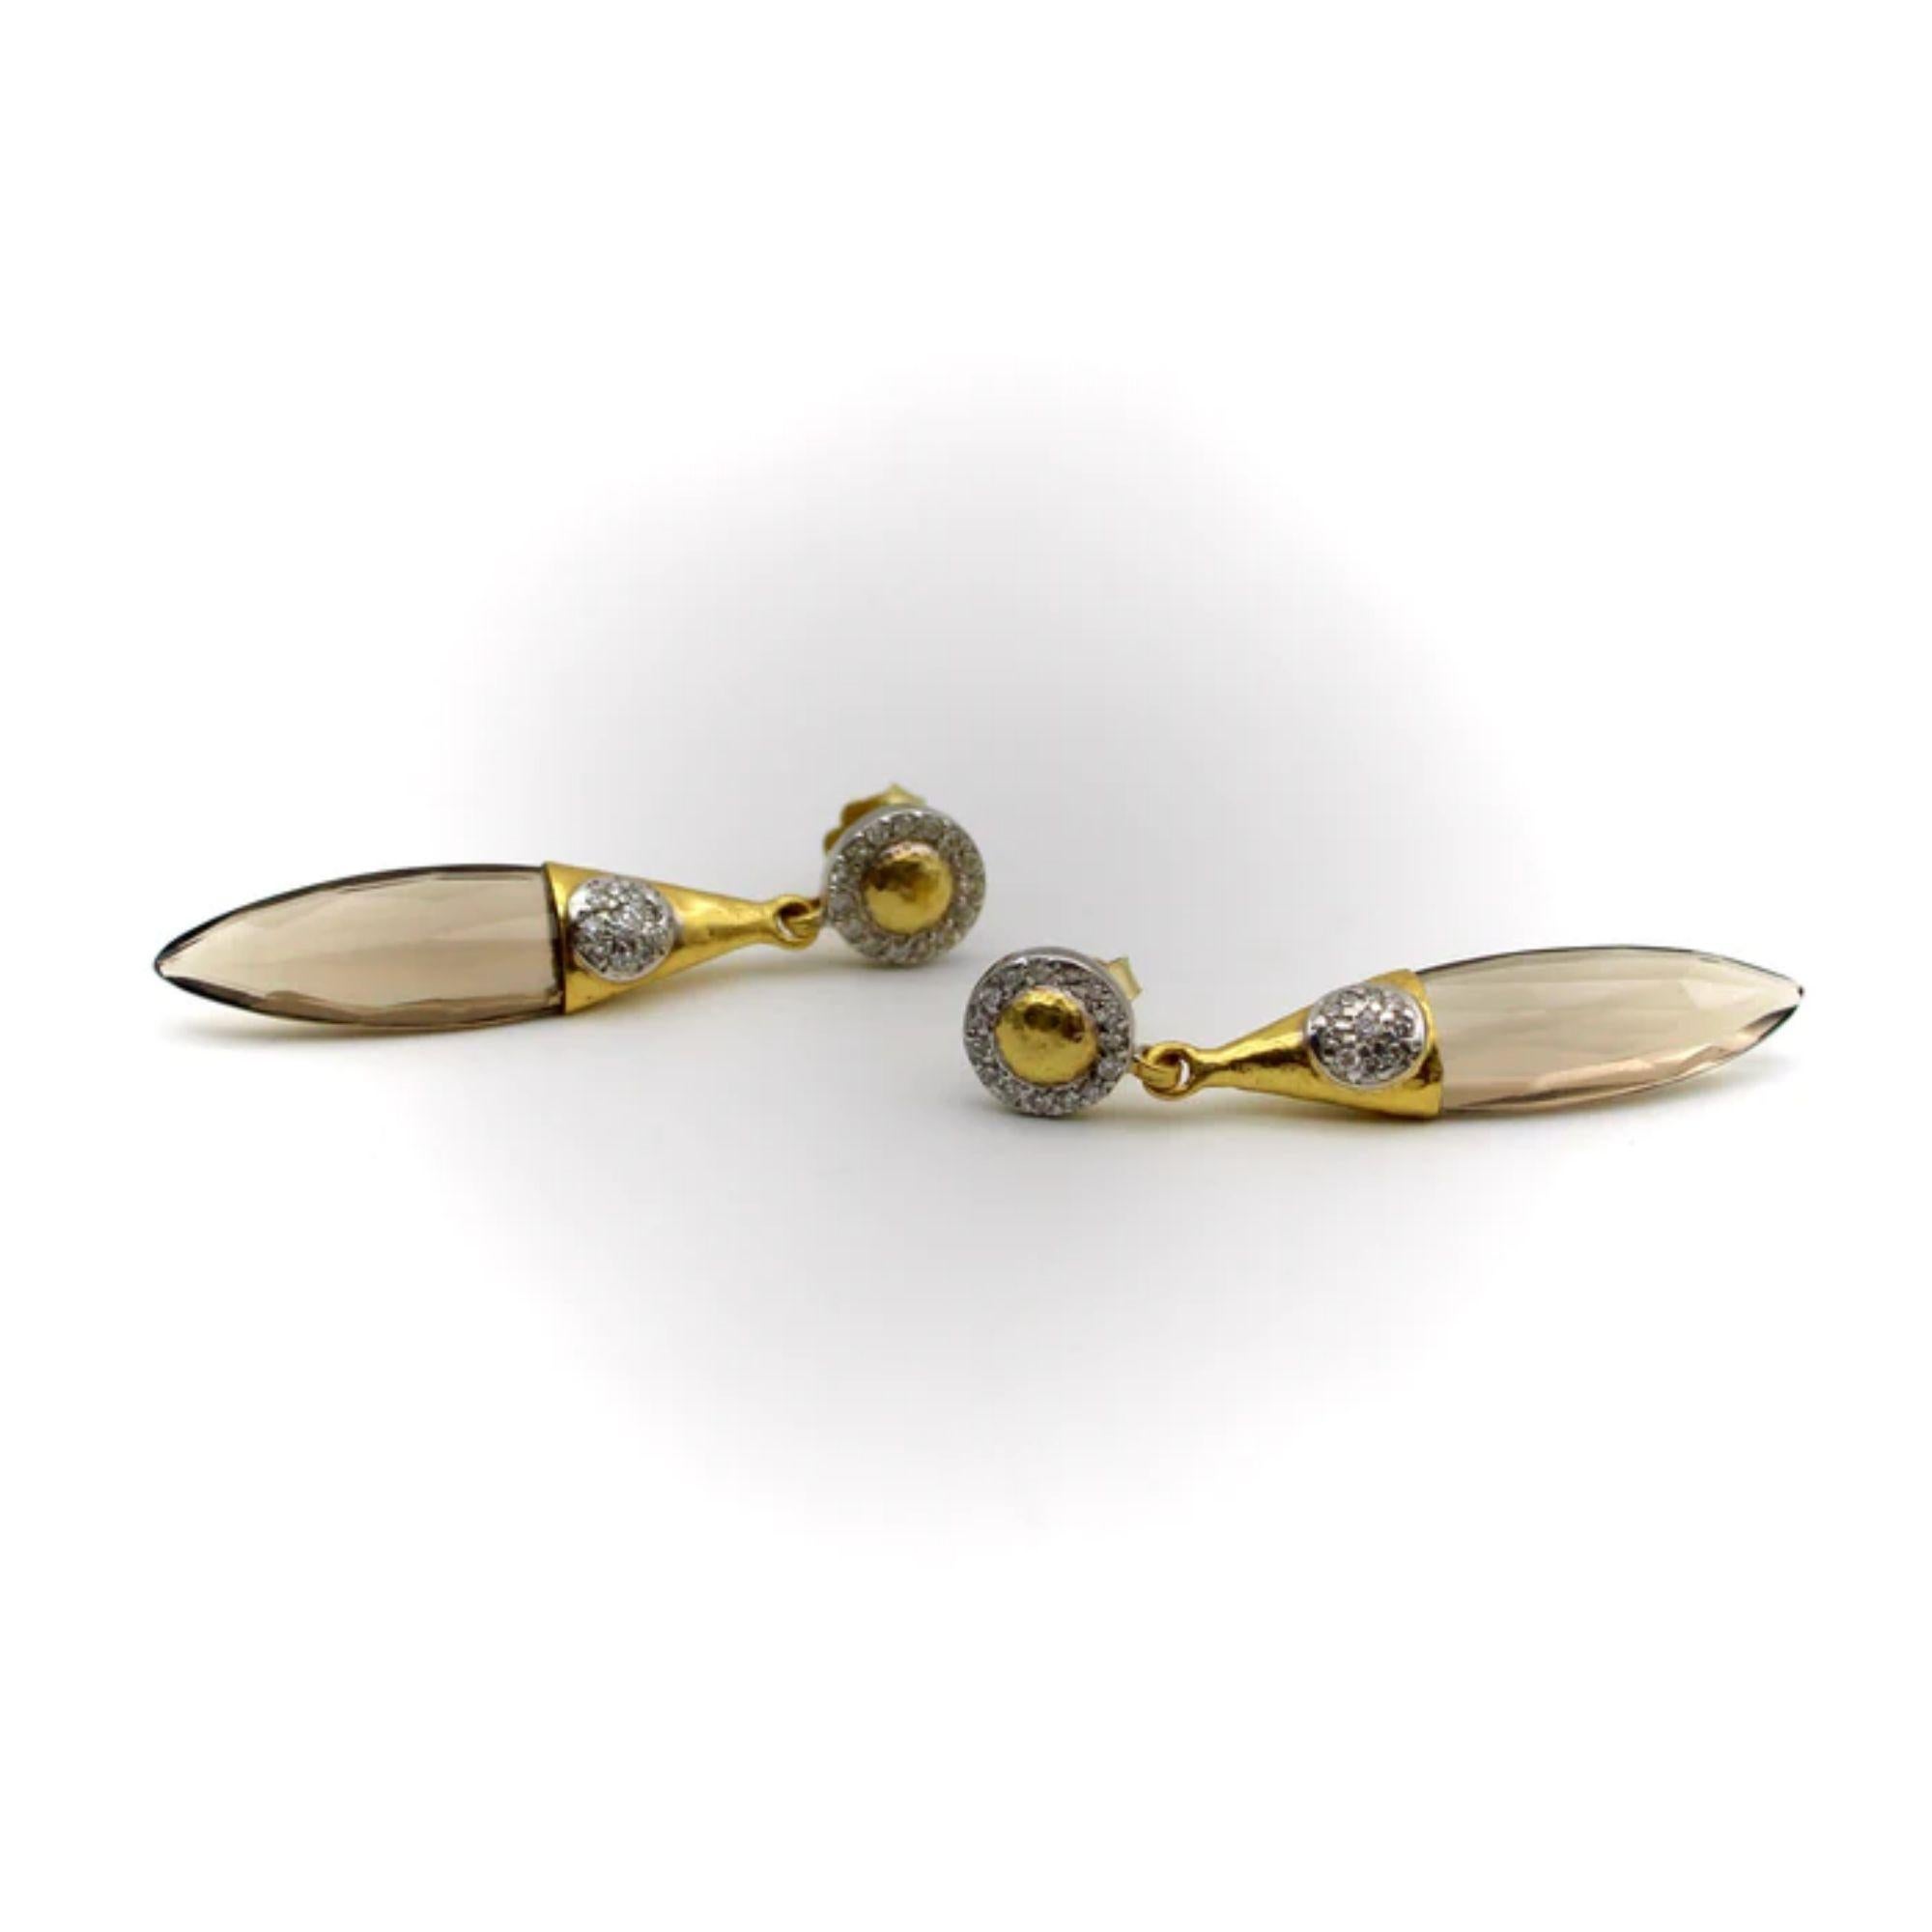 Gurhan 24K and 18K Gold Smoky Quartz Drop Earrings, 1990
 
These Gurhan earrings feature an elongated briolette cut smoky quartz drop, wrapped with hand hammered 24k gold. Th earring’s dangle is decorated with a diamond flower, bead set into 24k